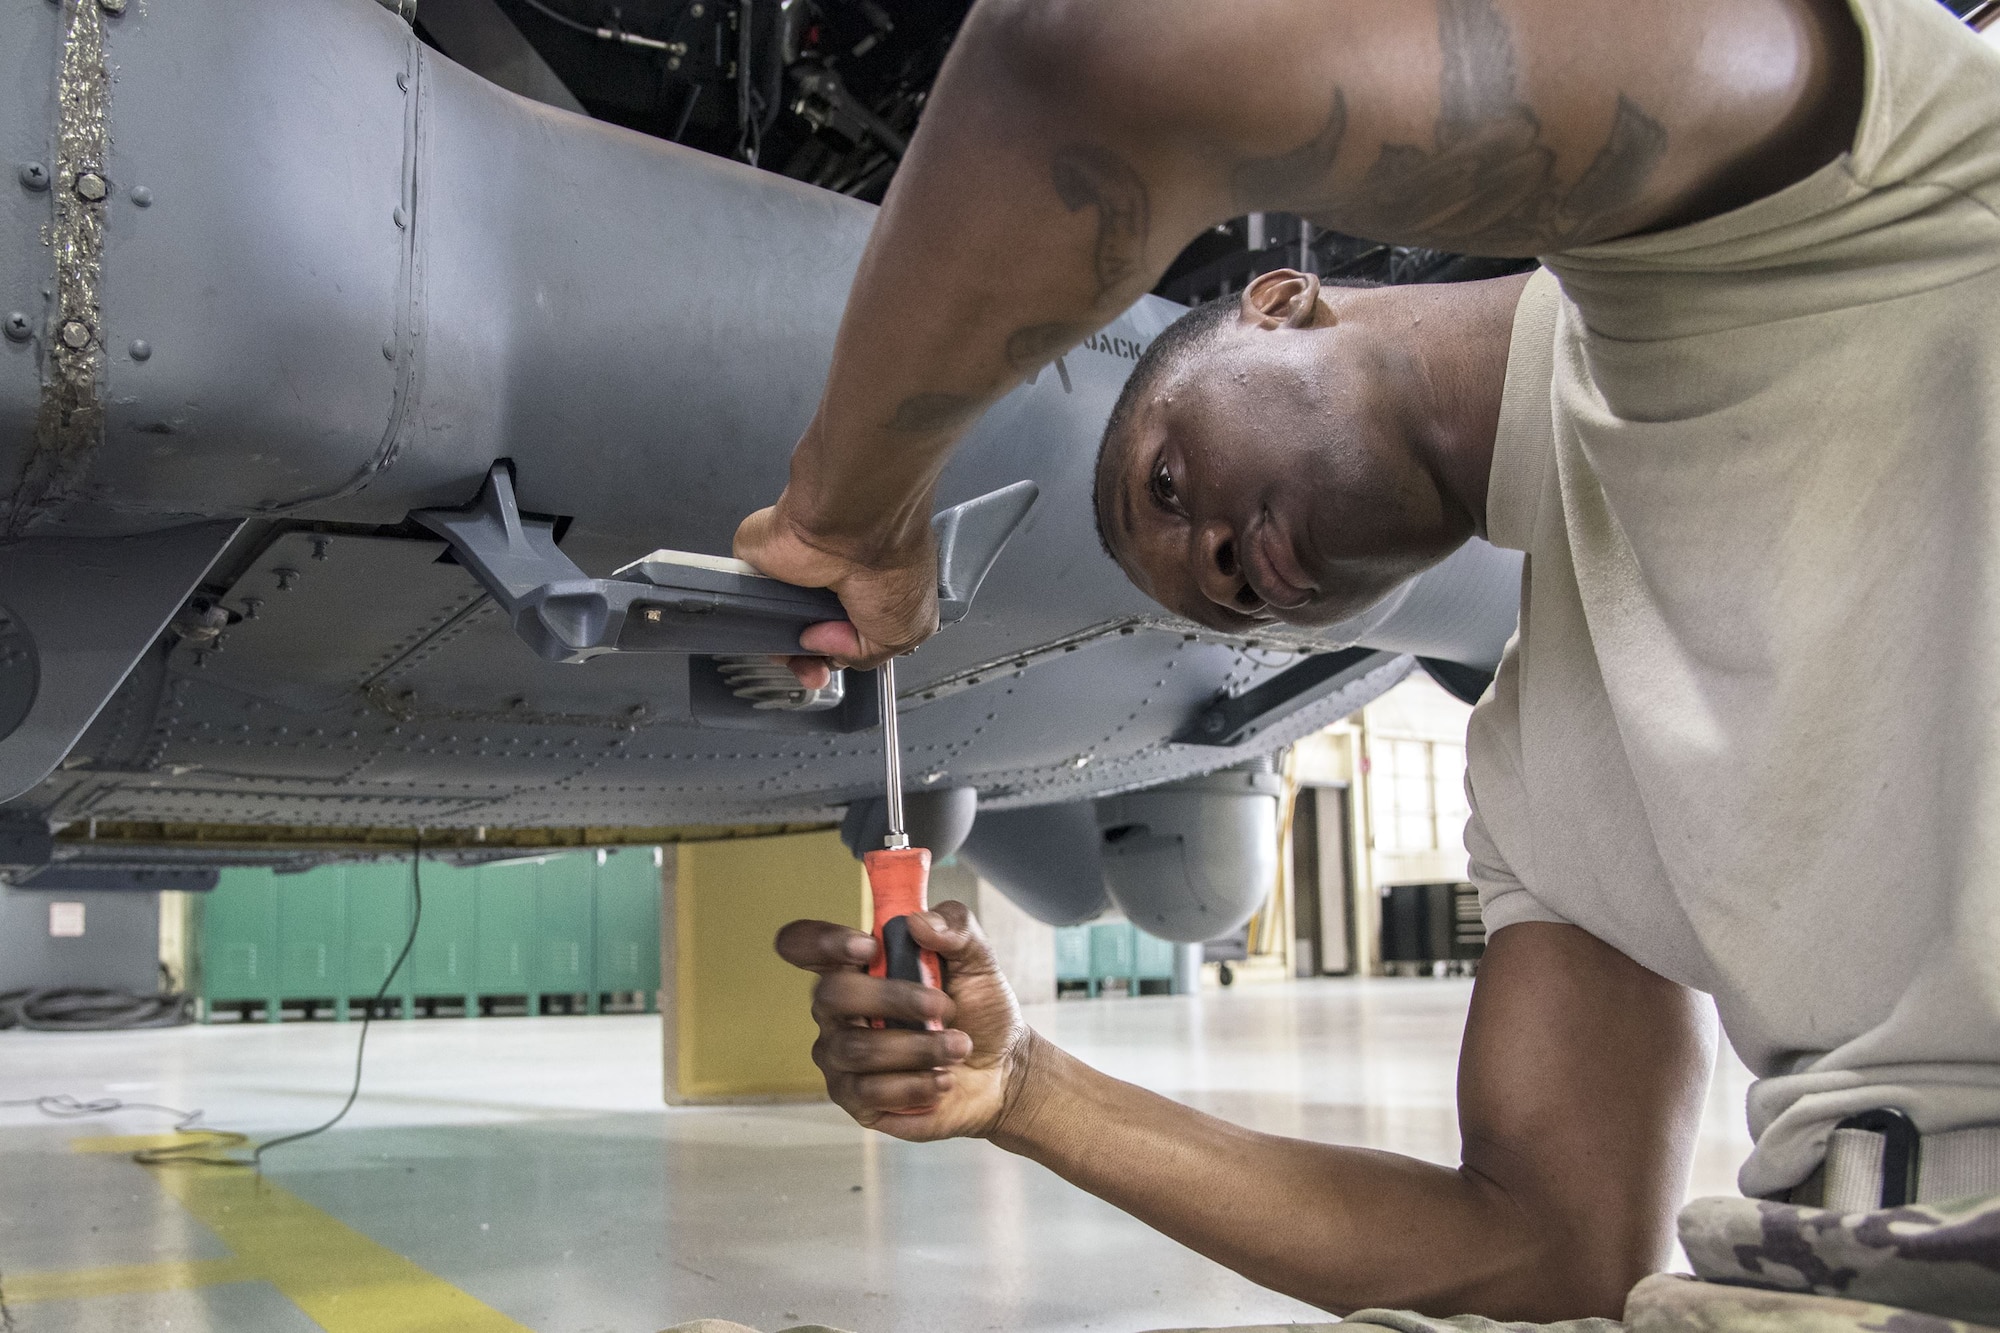 Airman 1st Class Marlon Natty, 723d Aircraft Maintenance Squadron (AMXS) HH-60G Pave Hawk crew chief, tightens a bolt, Jan. 22, 2018, at Moody Air Force Base, Ga. From 16-25 Jan., Airmen from the 723d AMXS performed 216 hours of maintenance on an HH-60 after it returned to Moody following 350 days of depot maintenance at Naval Air Station (NAS) Jacksonville. While at NAS Jacksonville, the HH-60 underwent a complete structural overhaul where it received new internal and external components along with repairs and updated programming. (U.S. Air Force photo by Airman Eugene Oliver)